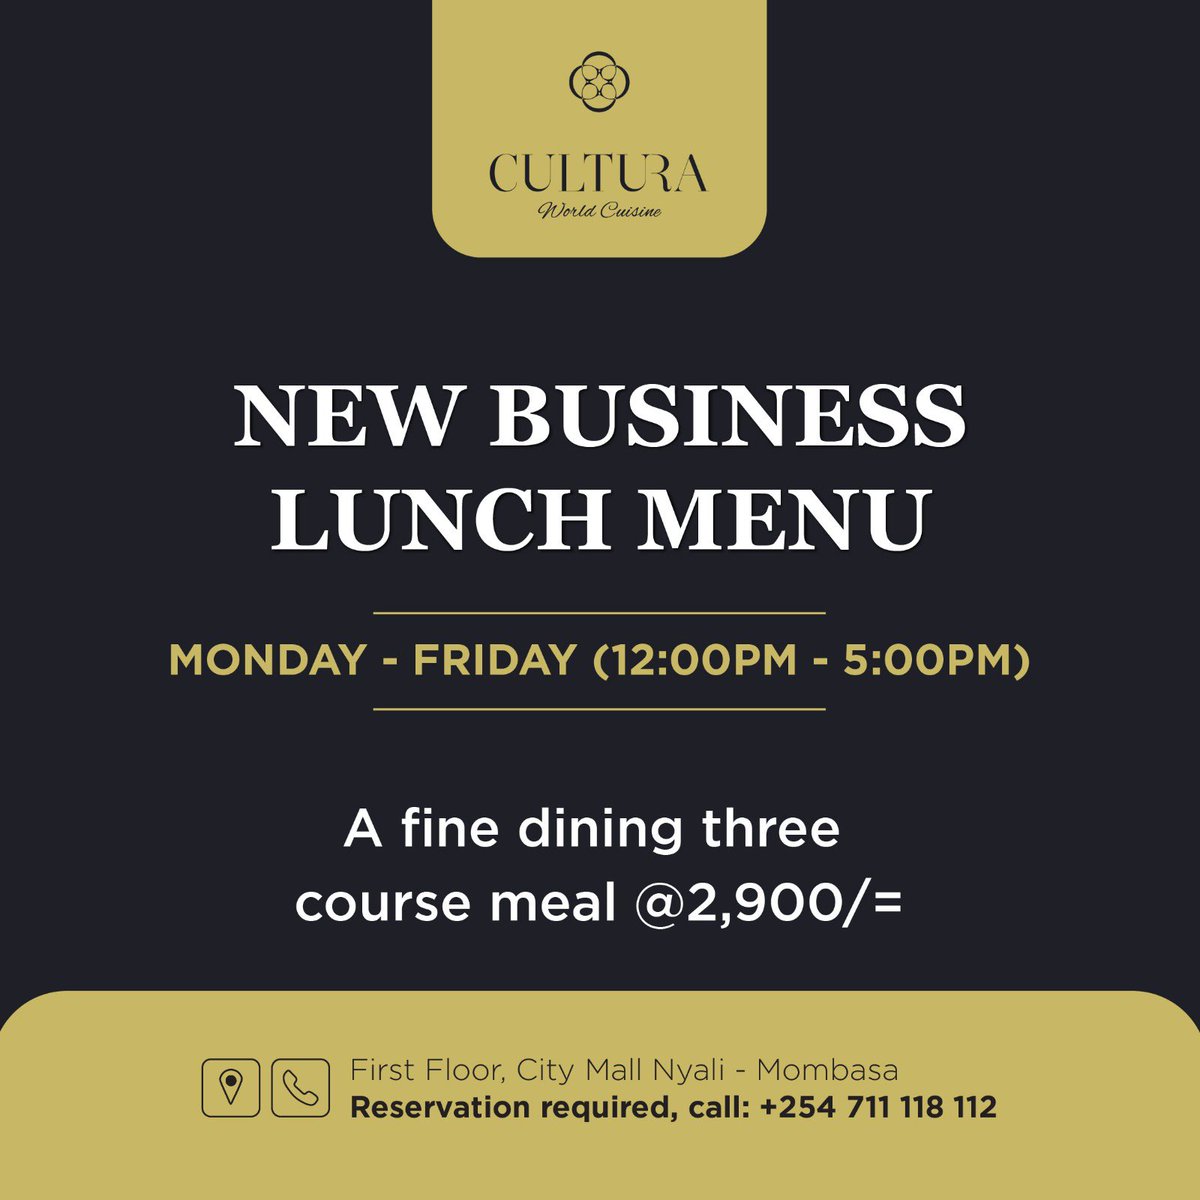 Business Lunch at Cultura this week? YES PLEASE!!! Enjoy our lunch special for a stylish, delightful and elegant mid day break Cultura Mombasa 🍽️✨🍷! Open for #Lunch and #Dinner - #Reservation required on +254 711 118 112 #FineDining #Culinarydelight #foodie #mombasarestaurant